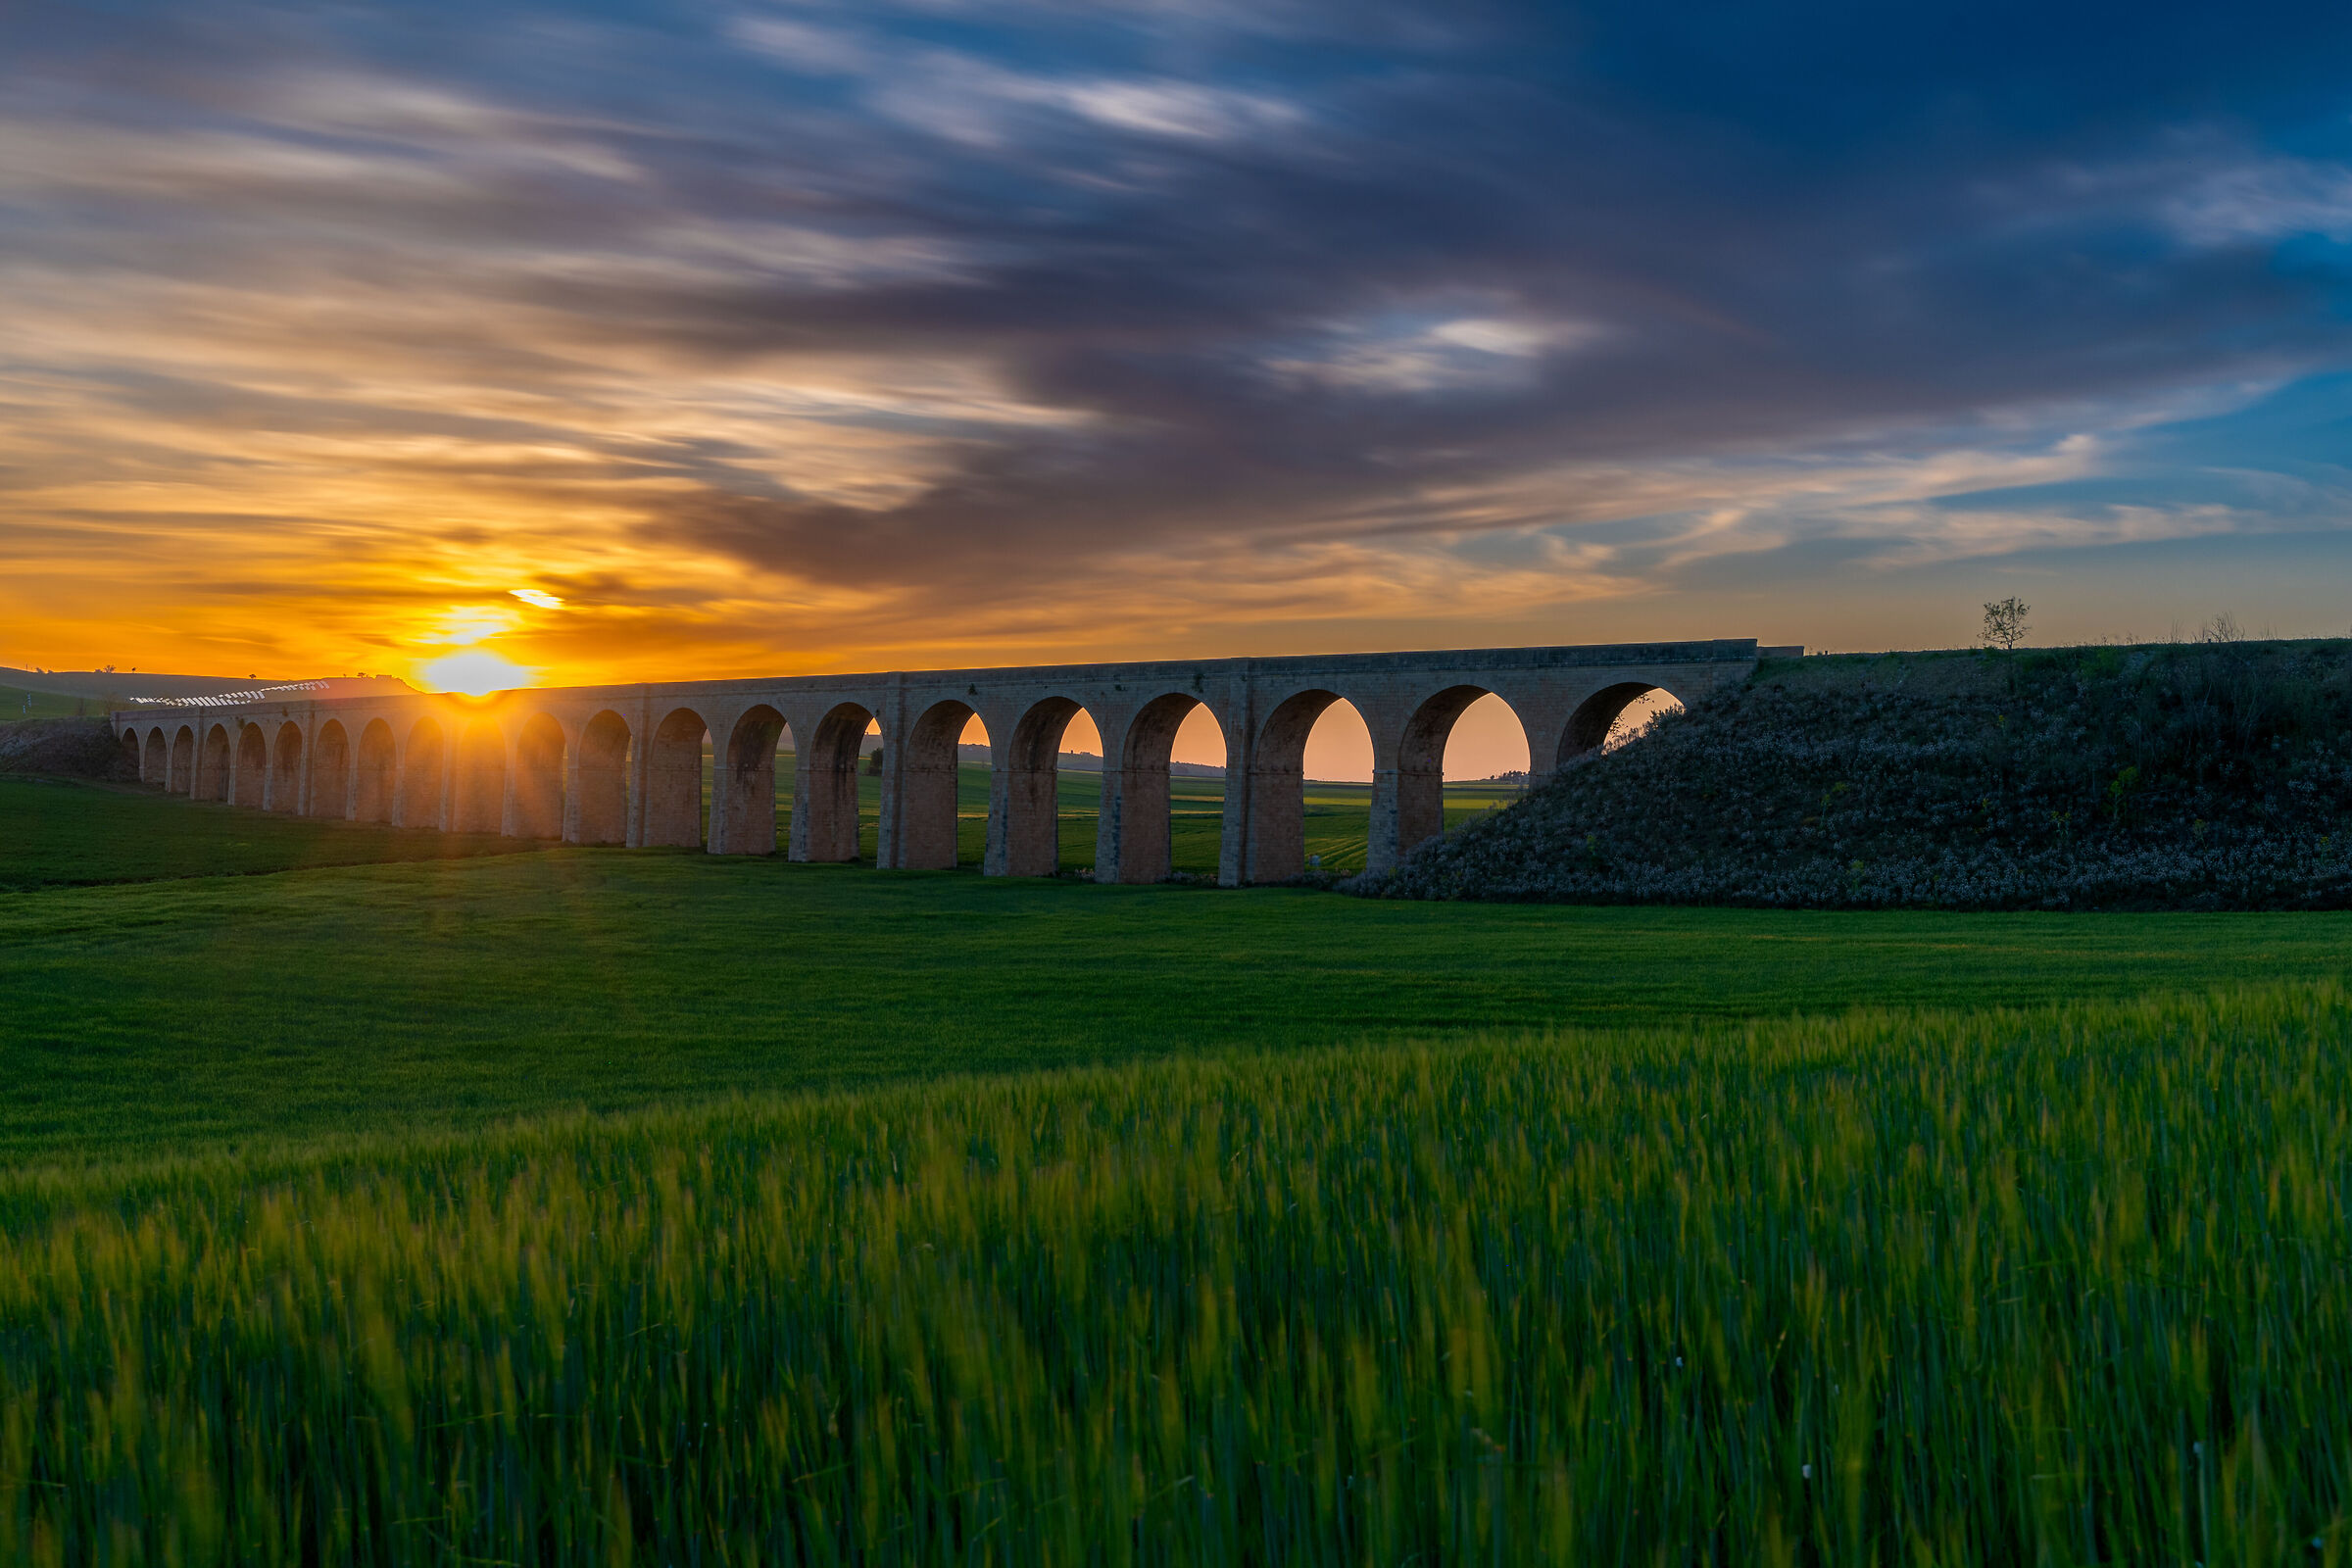 Sunset at the 21 Arches Bridge...